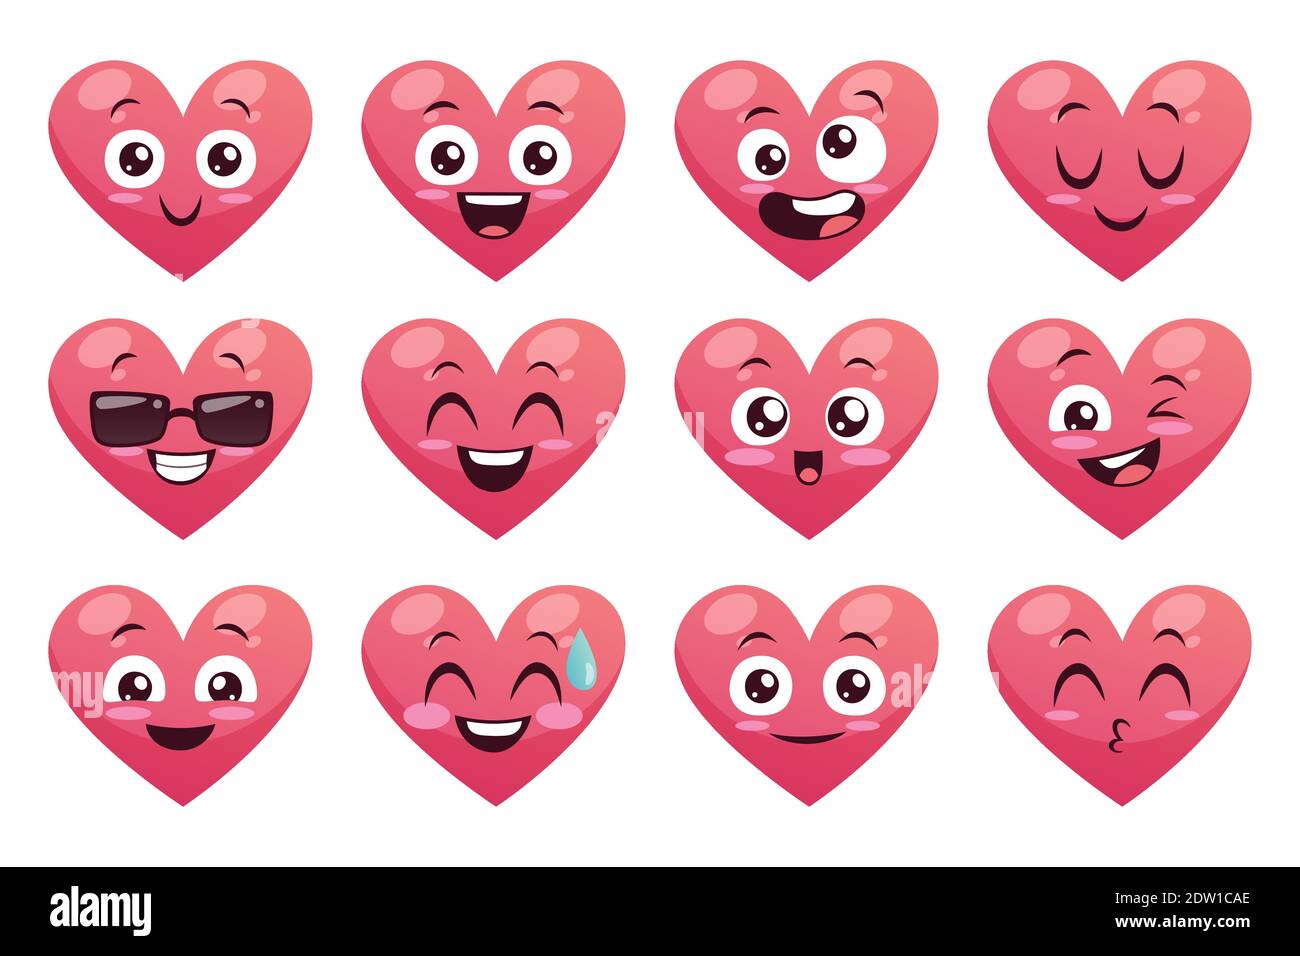 Collection of funny heart emoticons isolated on white background. Cartoon style. EPS 10 Vector illustration. Stock Vector